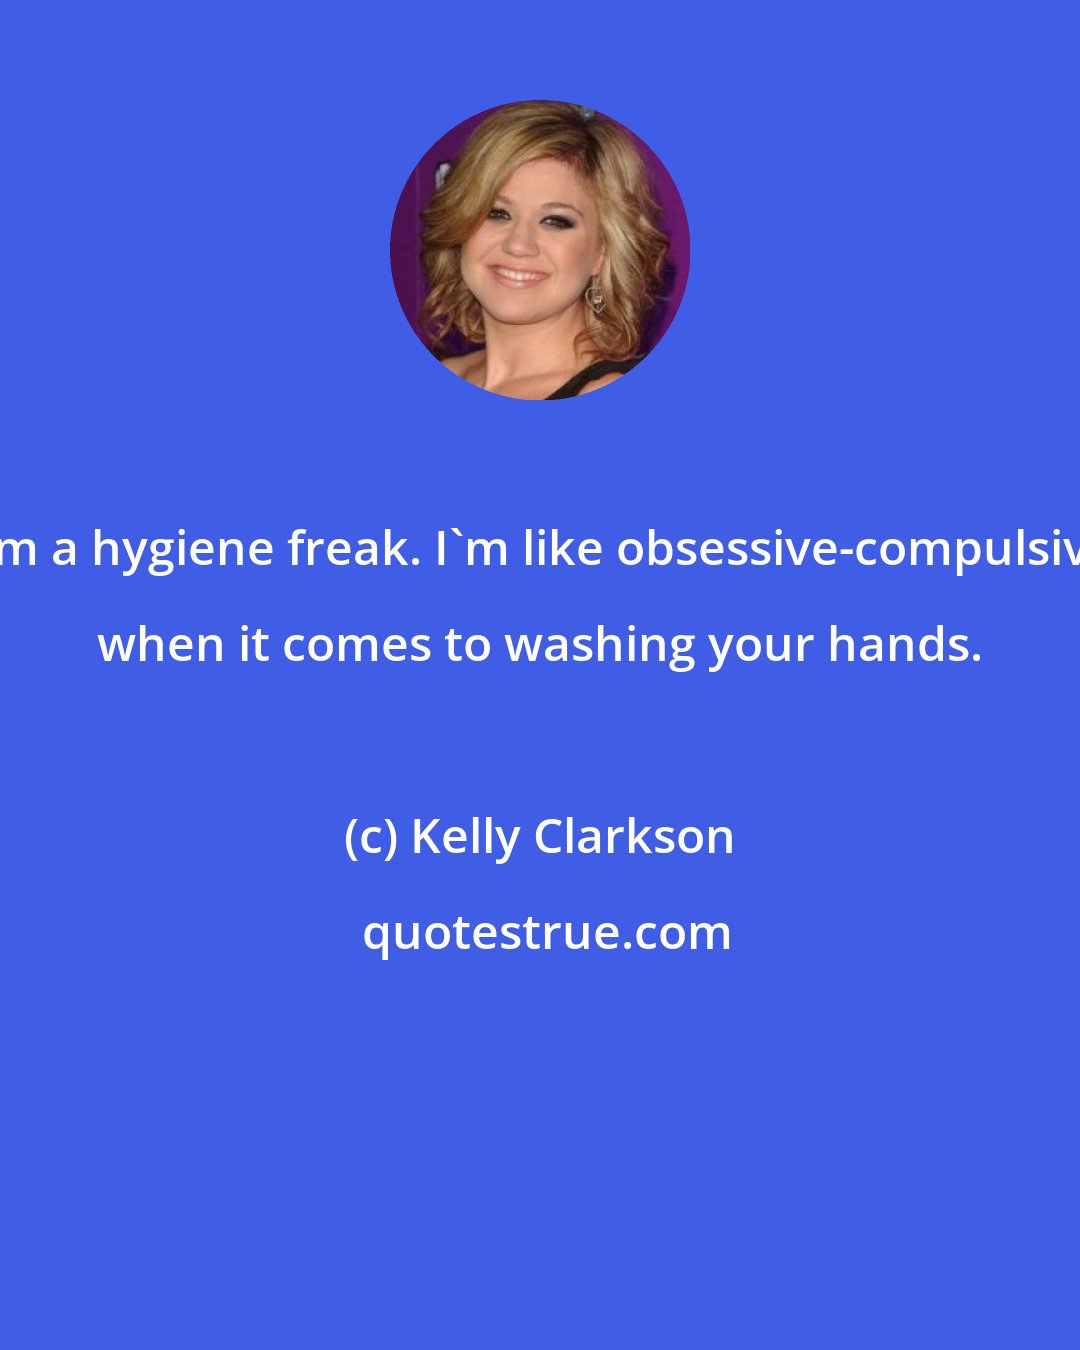 Kelly Clarkson: I'm a hygiene freak. I'm like obsessive-compulsive when it comes to washing your hands.